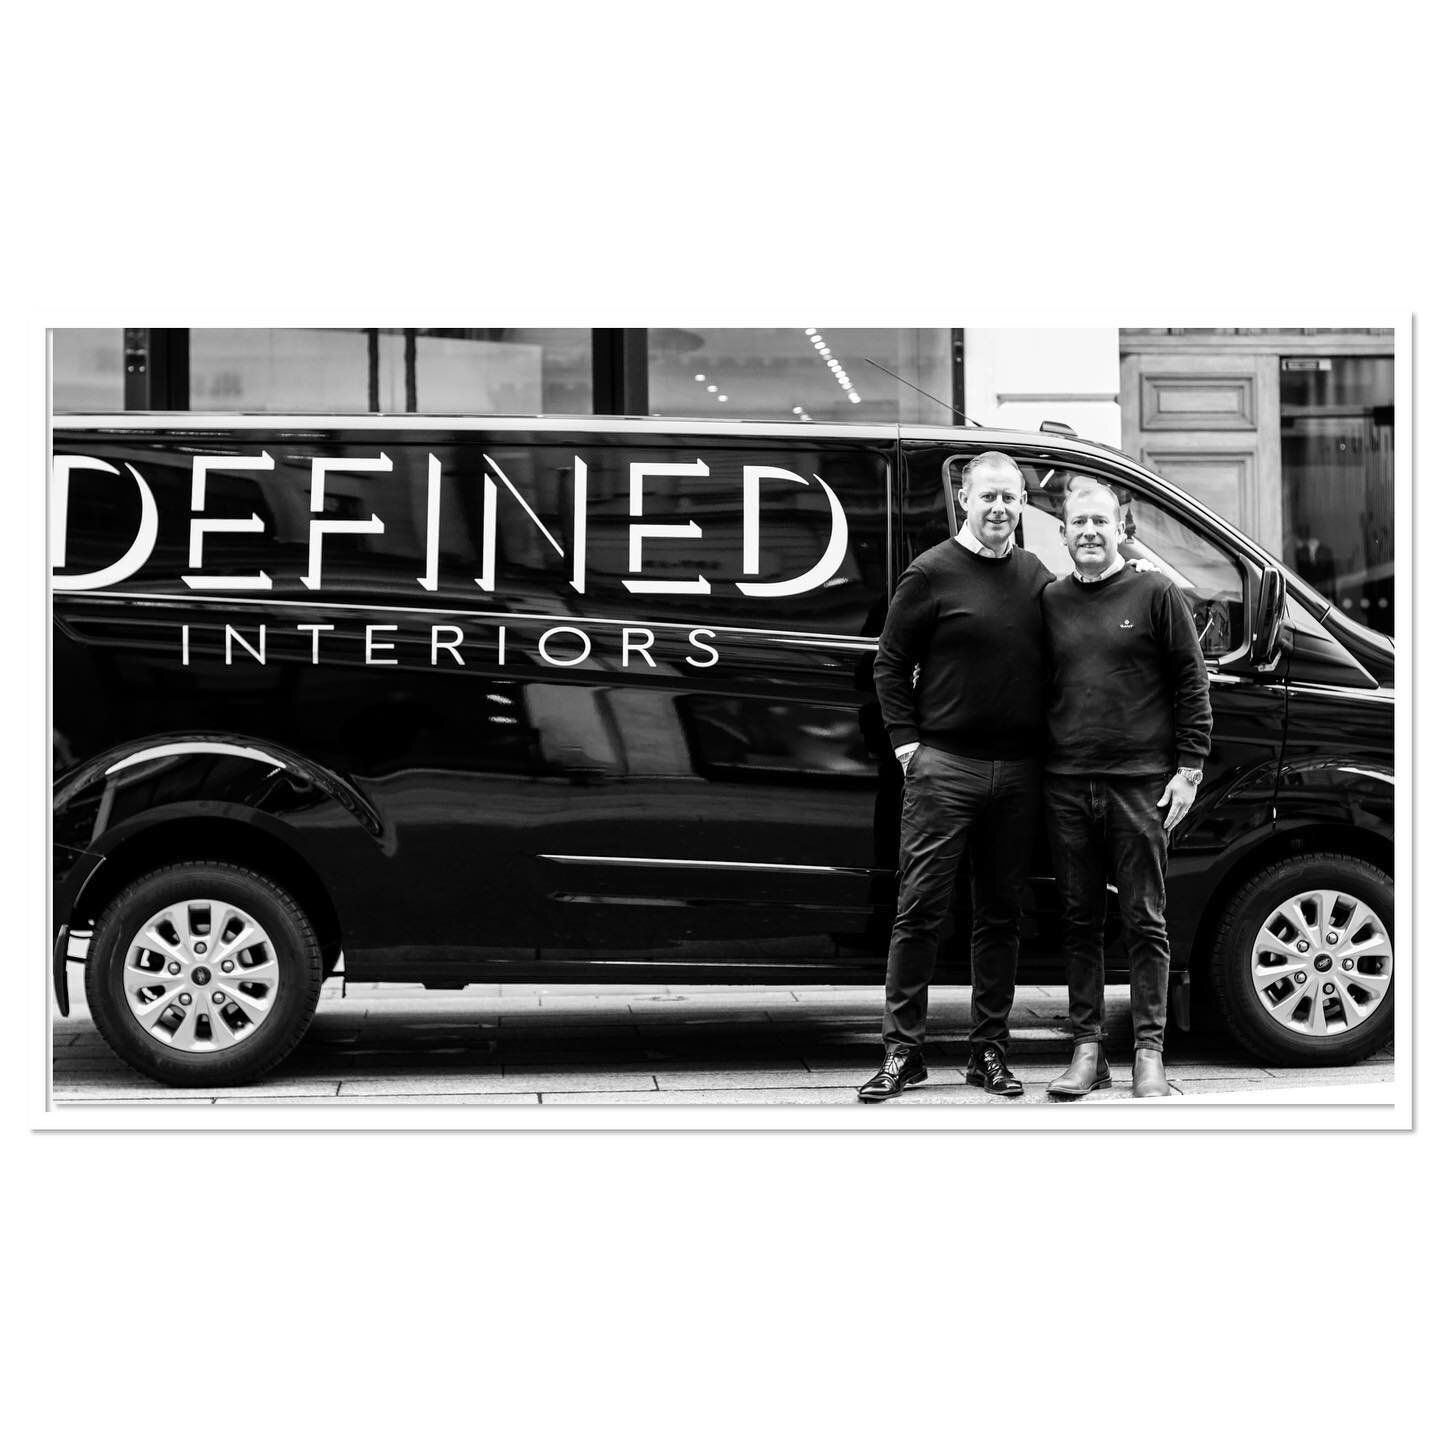 V E H I C L E  B R A N D I N G

Just two men and their van, stopping traffic on New Bond Street 💁&zwj;♂️💁&zwj;♂️

Don&rsquo;t mind us just out there making an impression, making those roads look better! 

If you see us, give us a wave, give us a to